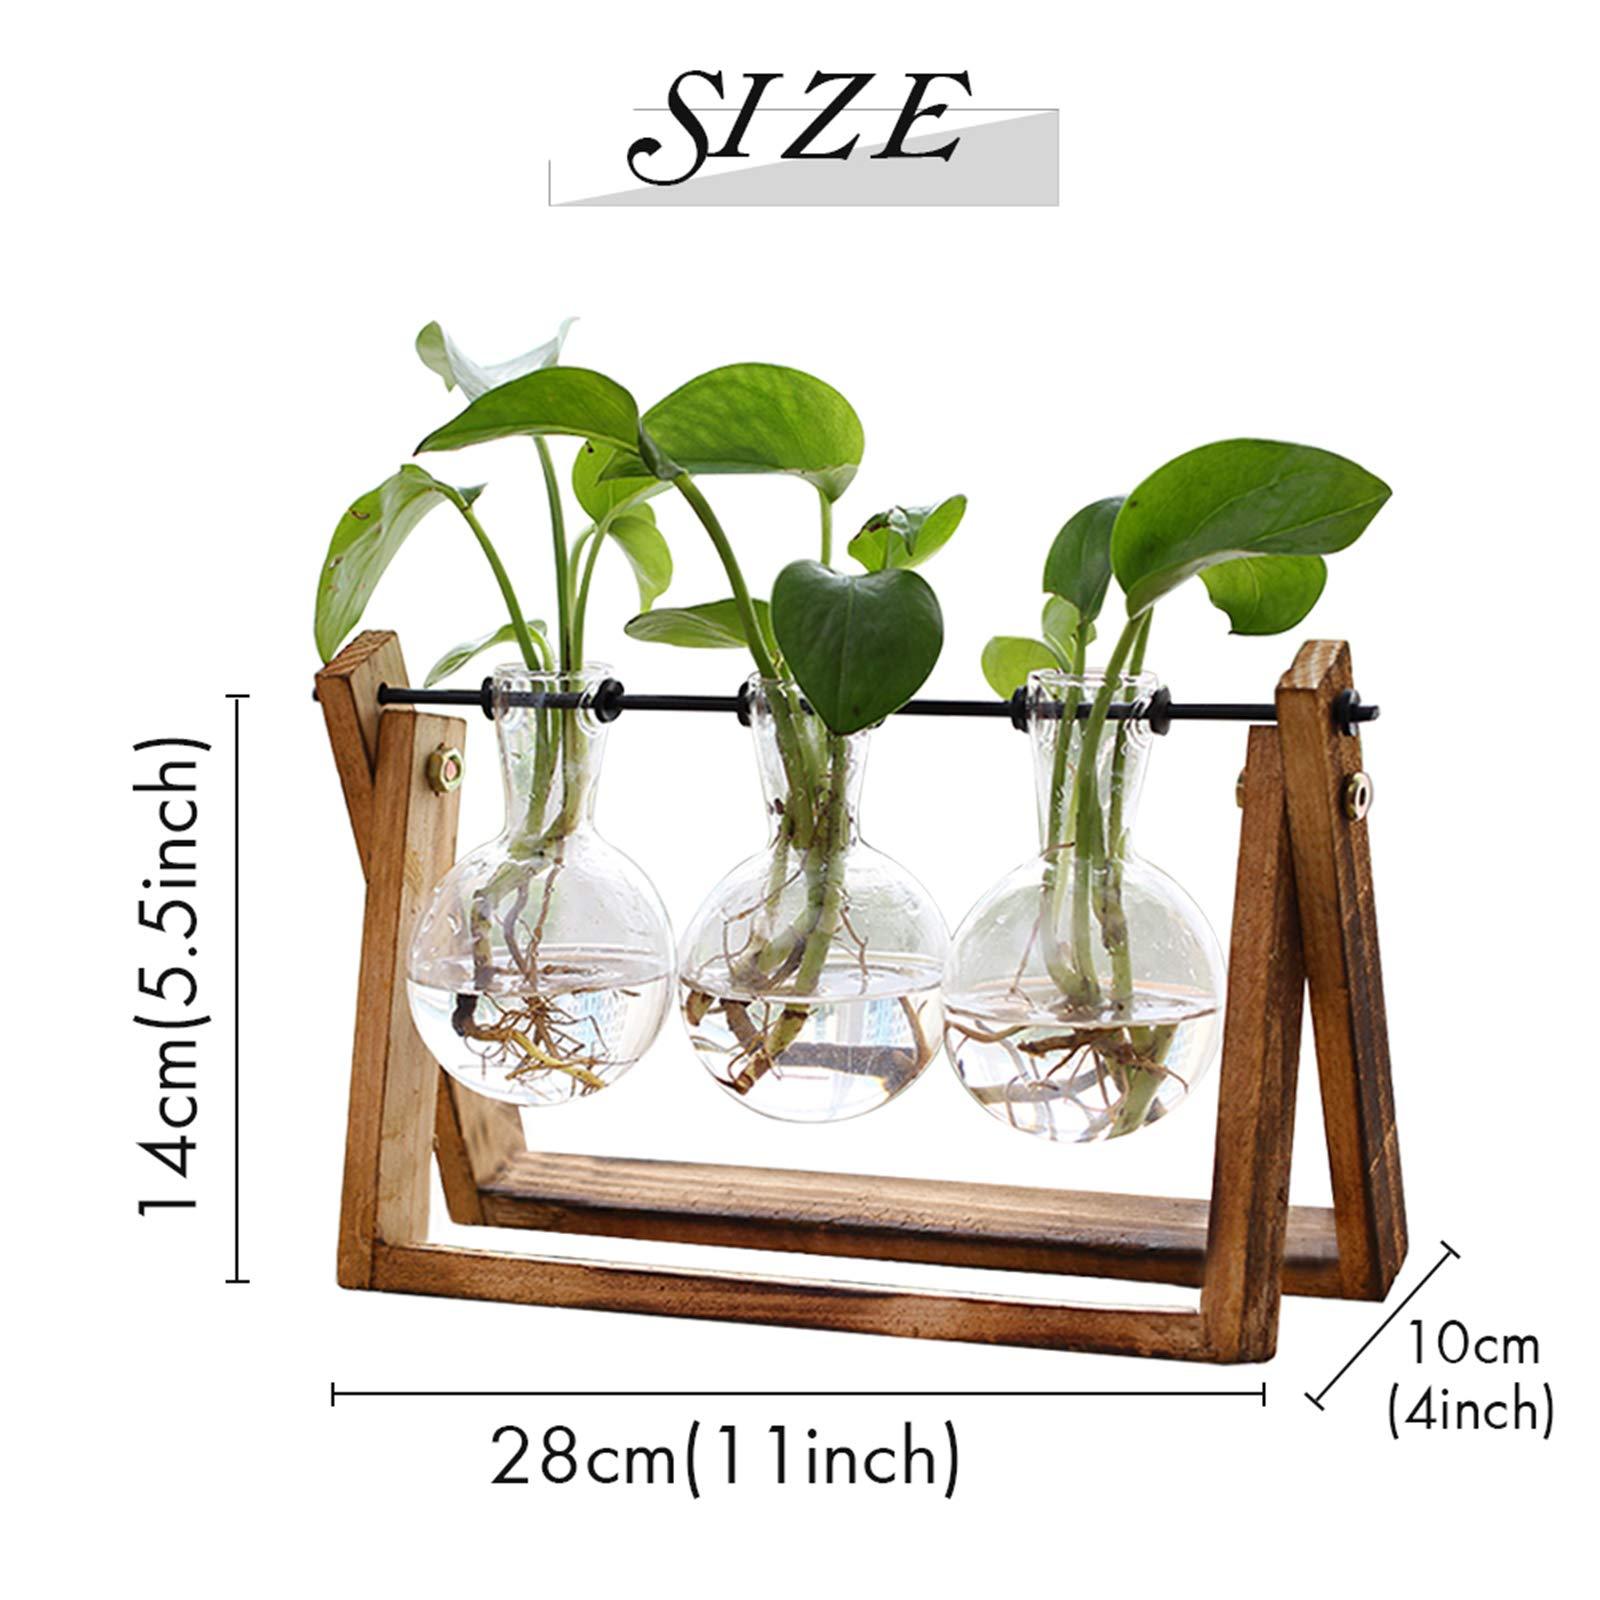 XXXFLOWER XXXFLOWER Plant Terrarium with Wooden Stand, Air Planter Bulb Glass Vase Metal Swivel Holder Retro Tabletop for Hydroponics Home Garden Office Decoration - 3 Bulb Vase - image 3 of 6